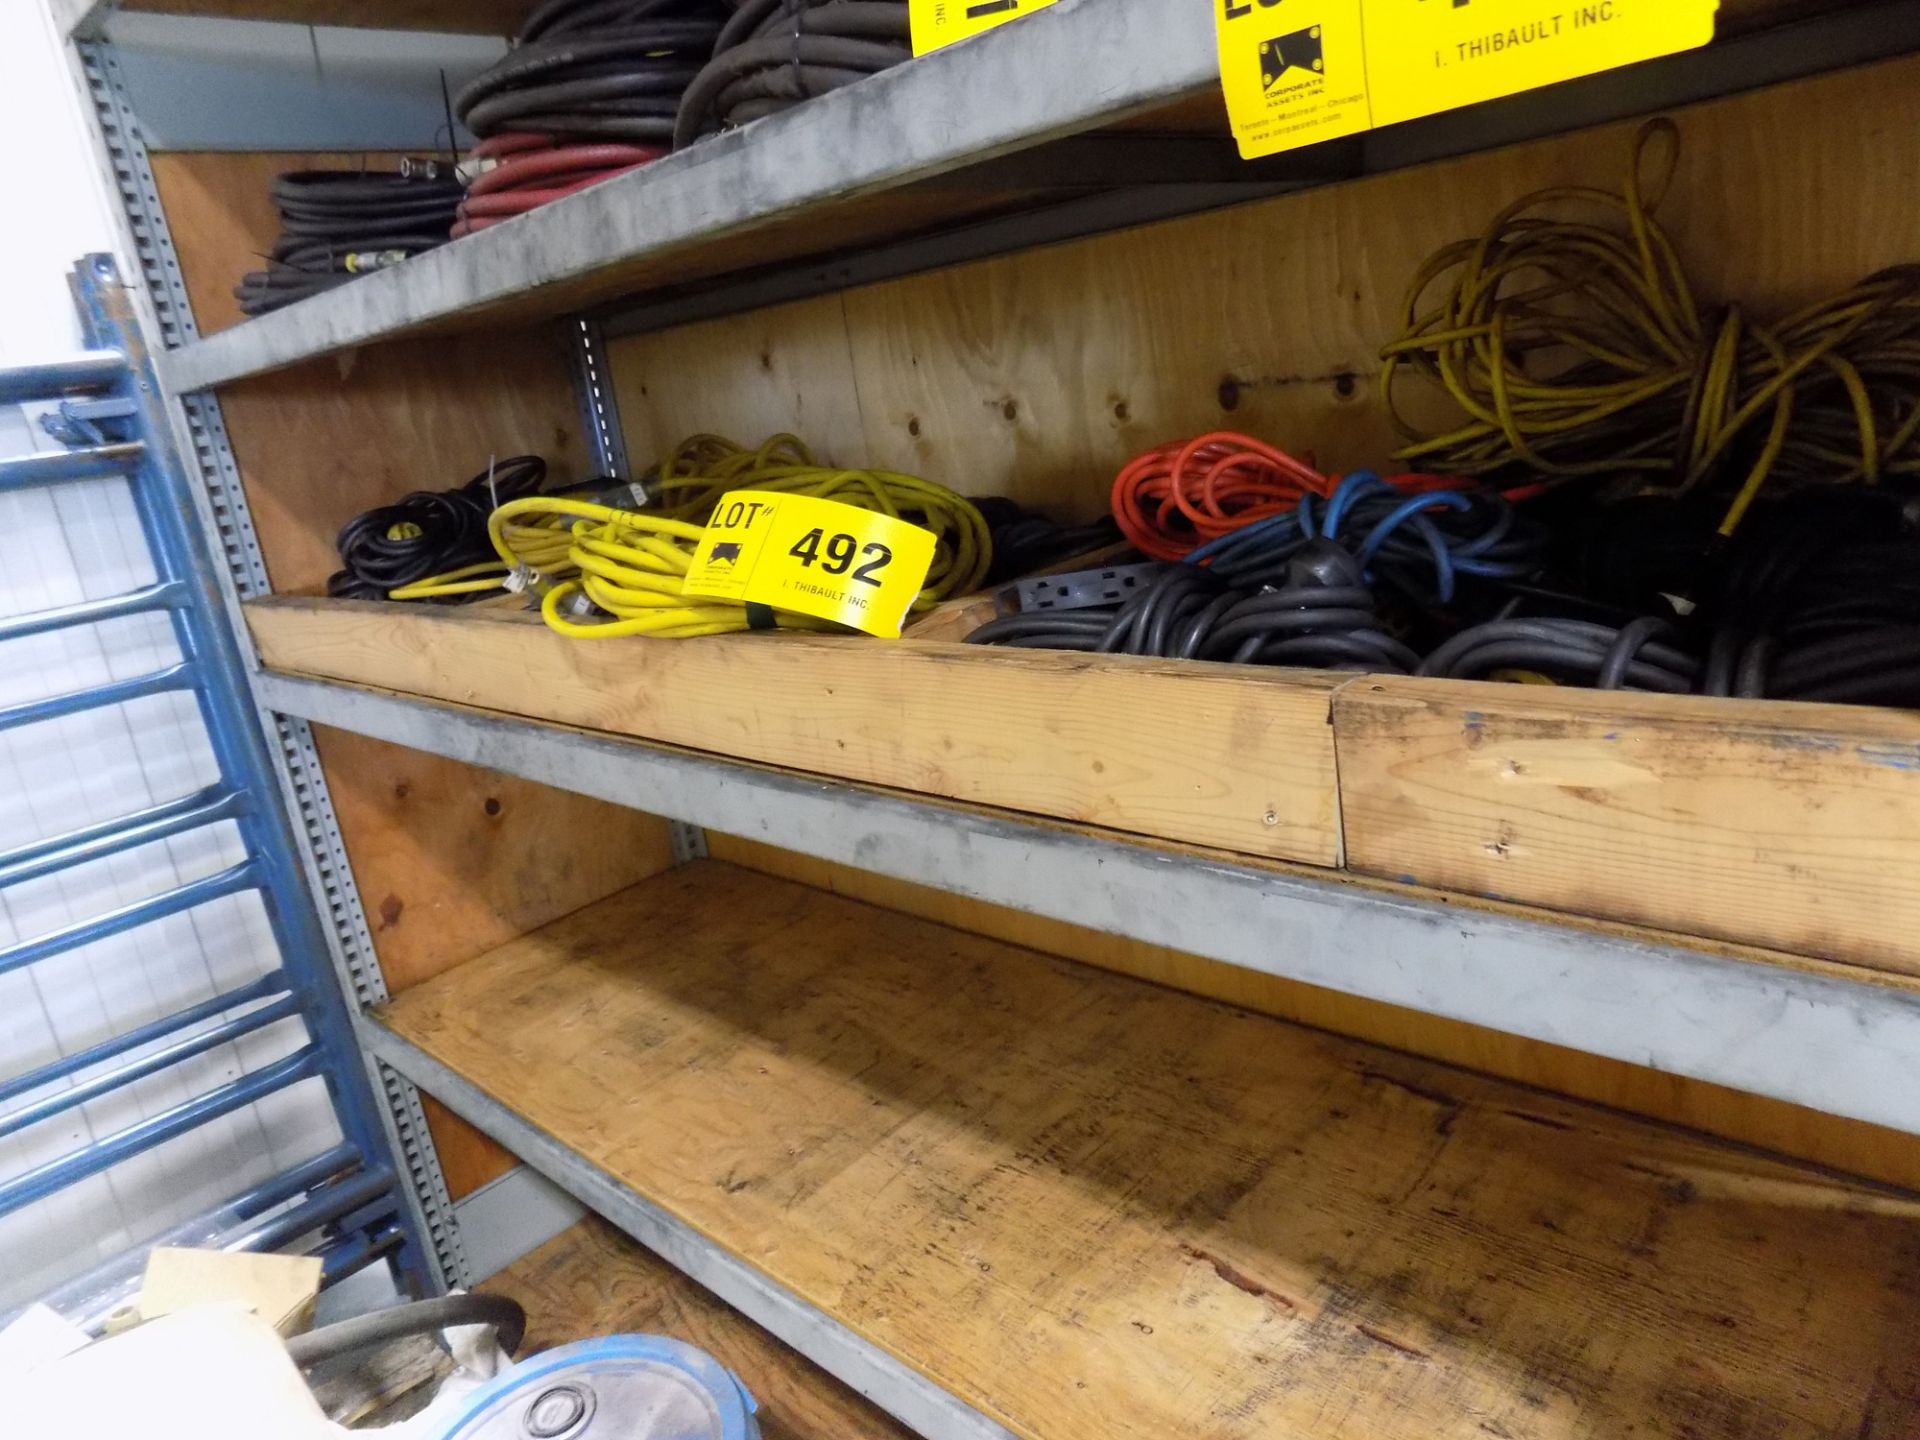 LOT/ ELECTRIC LIGHTS AND EXT CORDS